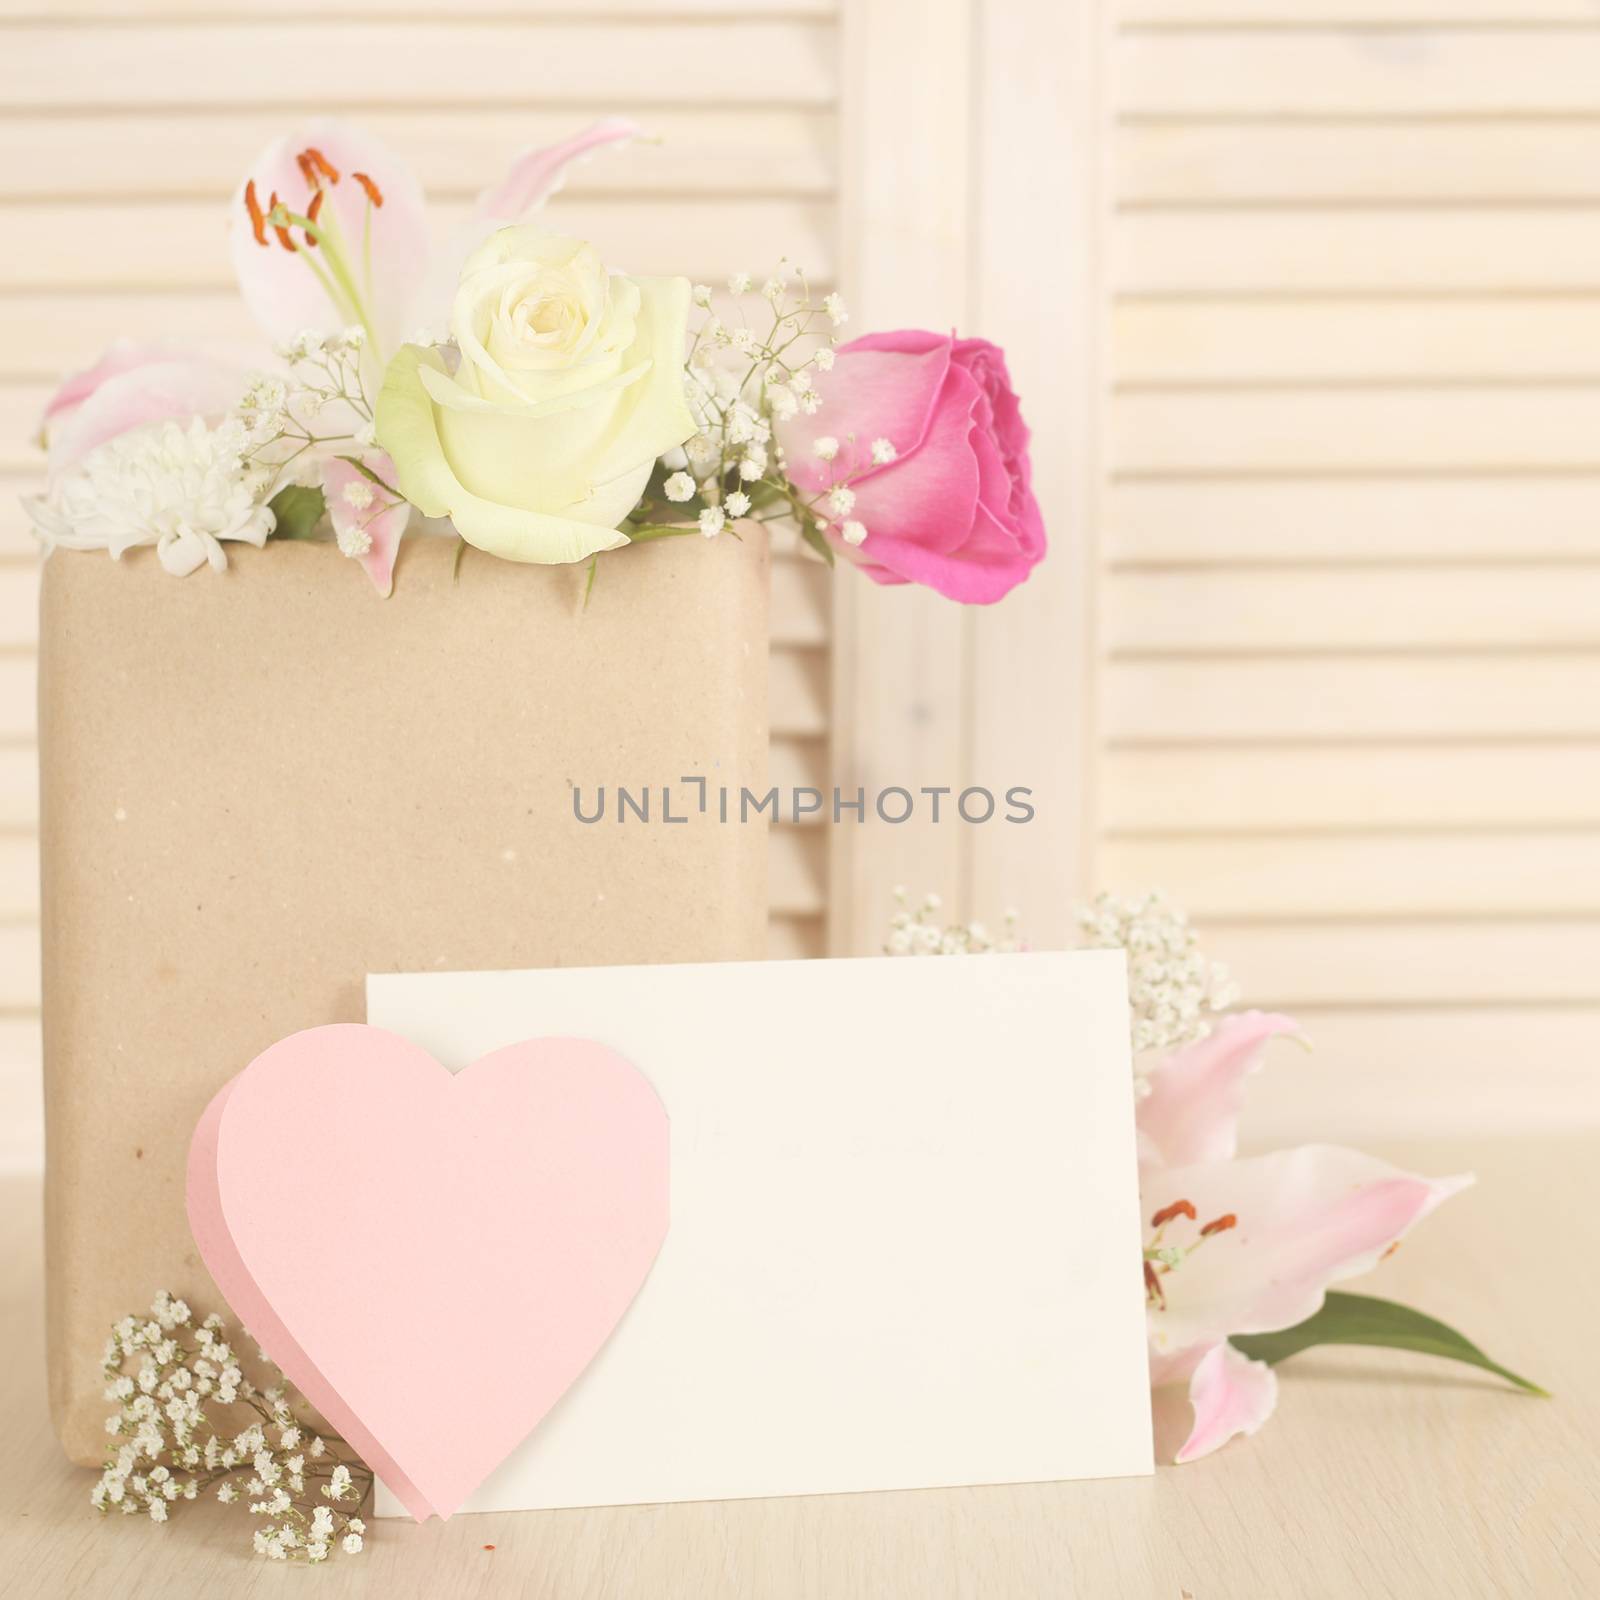 Flowers in paper bag and blank envelope on wooden background